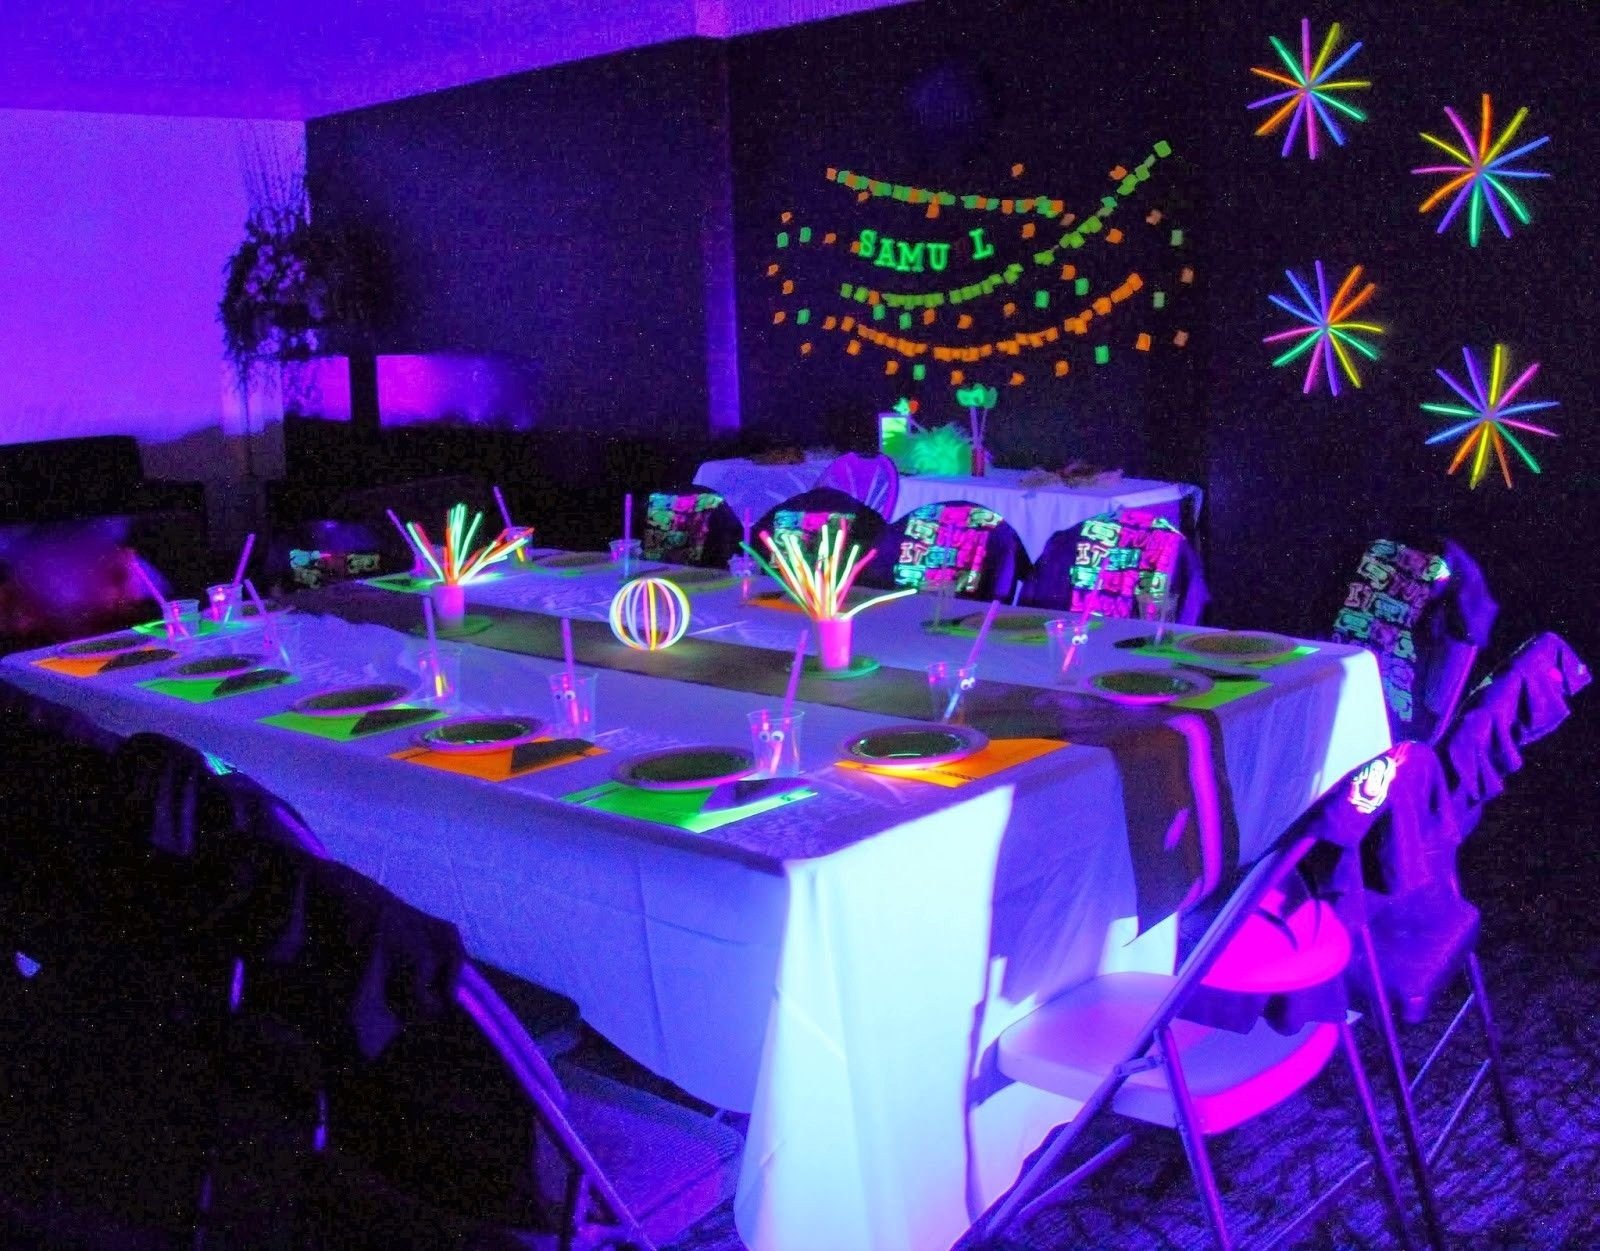 10 Lovely Glow In The Dark Party Ideas glow in the dark party ideas for teenagers 1600x1251 cam 2 2022